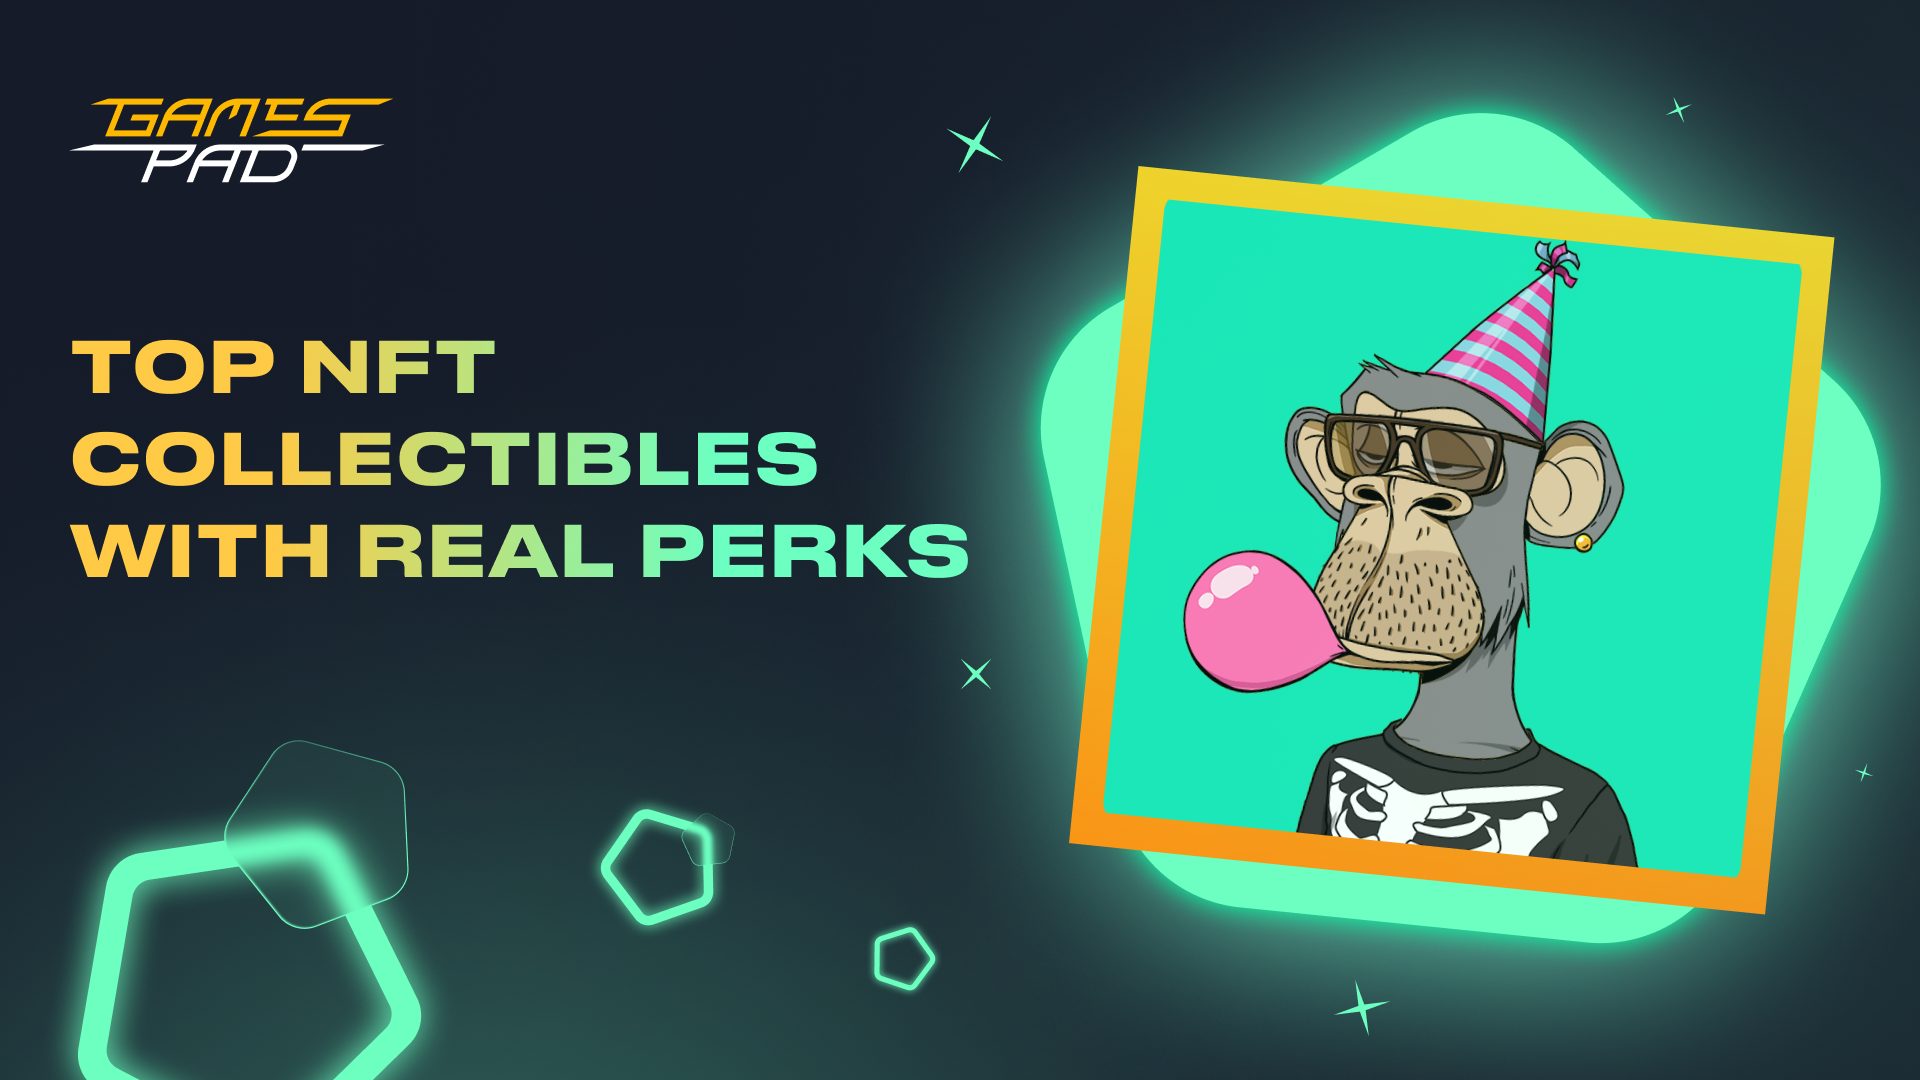 GamesPad: Top NFT Collectibles With Real Perks 1